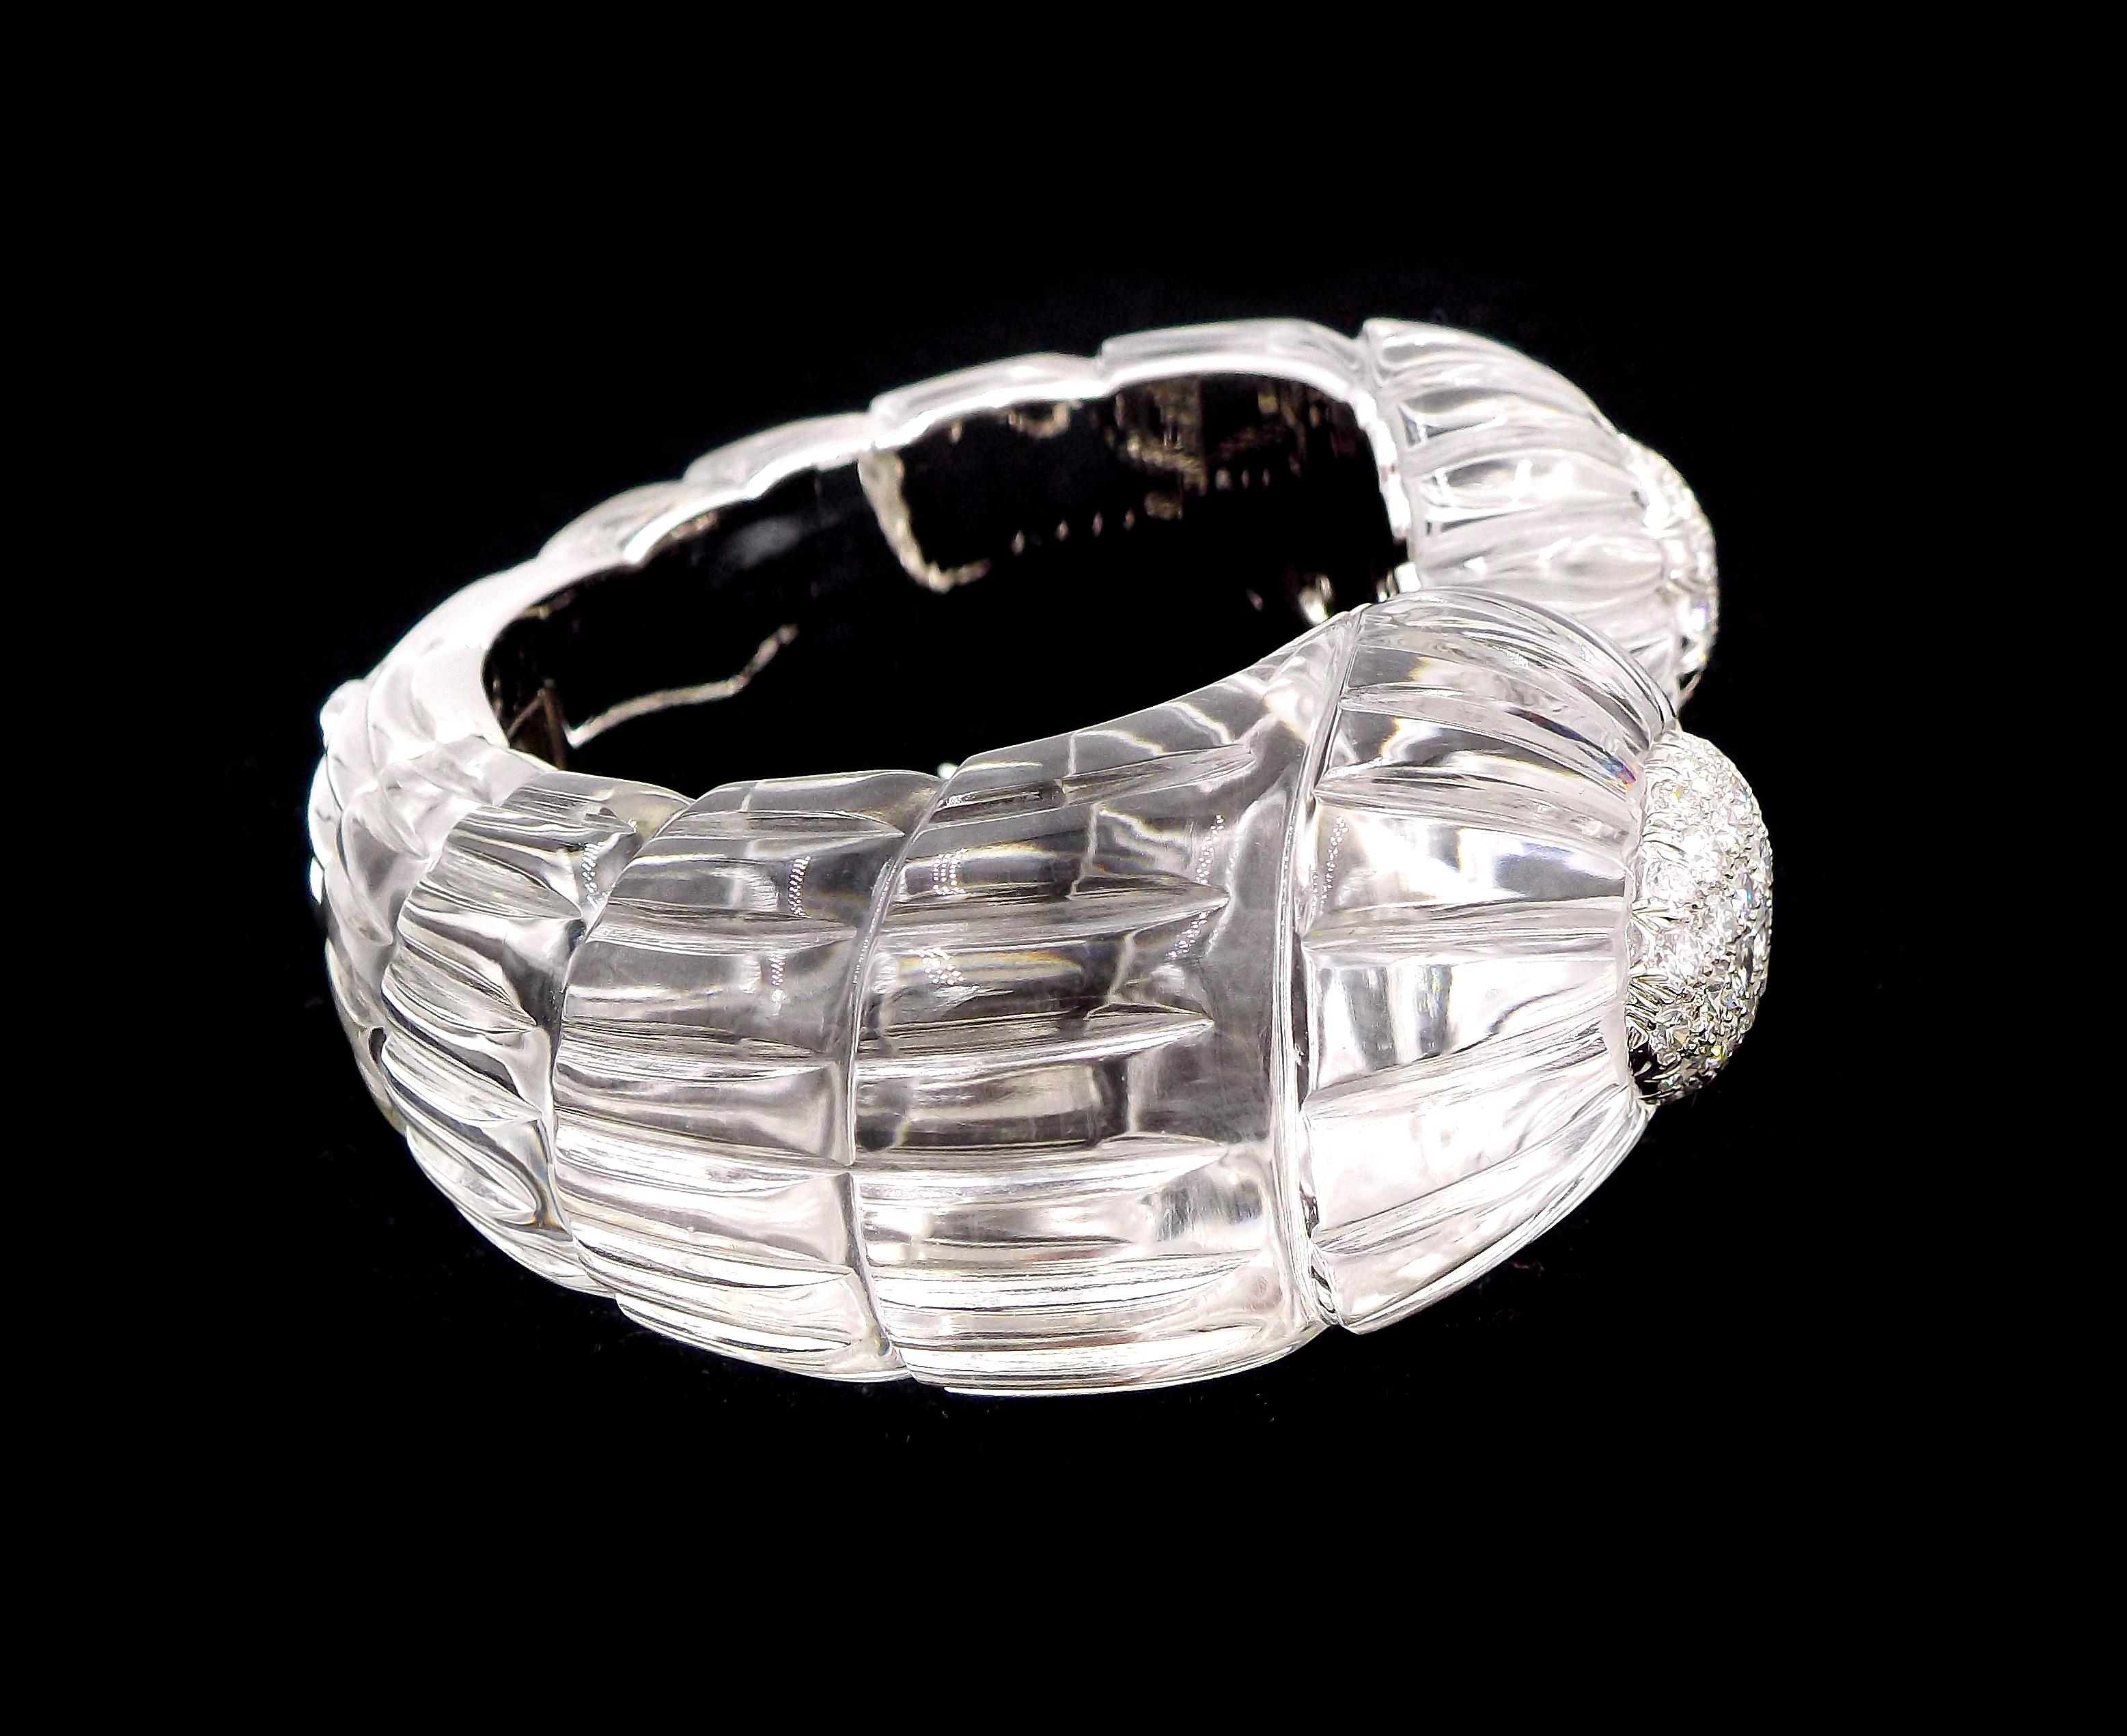 An elegant rock crystal cuff bracelet from the Twilight collection made by David Webb. Featuring carved rock crystal, approx. 5.90ct of brilliant-cut diamonds, set in 18K white gold and platinum. Inner circumference is approx. 6.25 inches. Signed